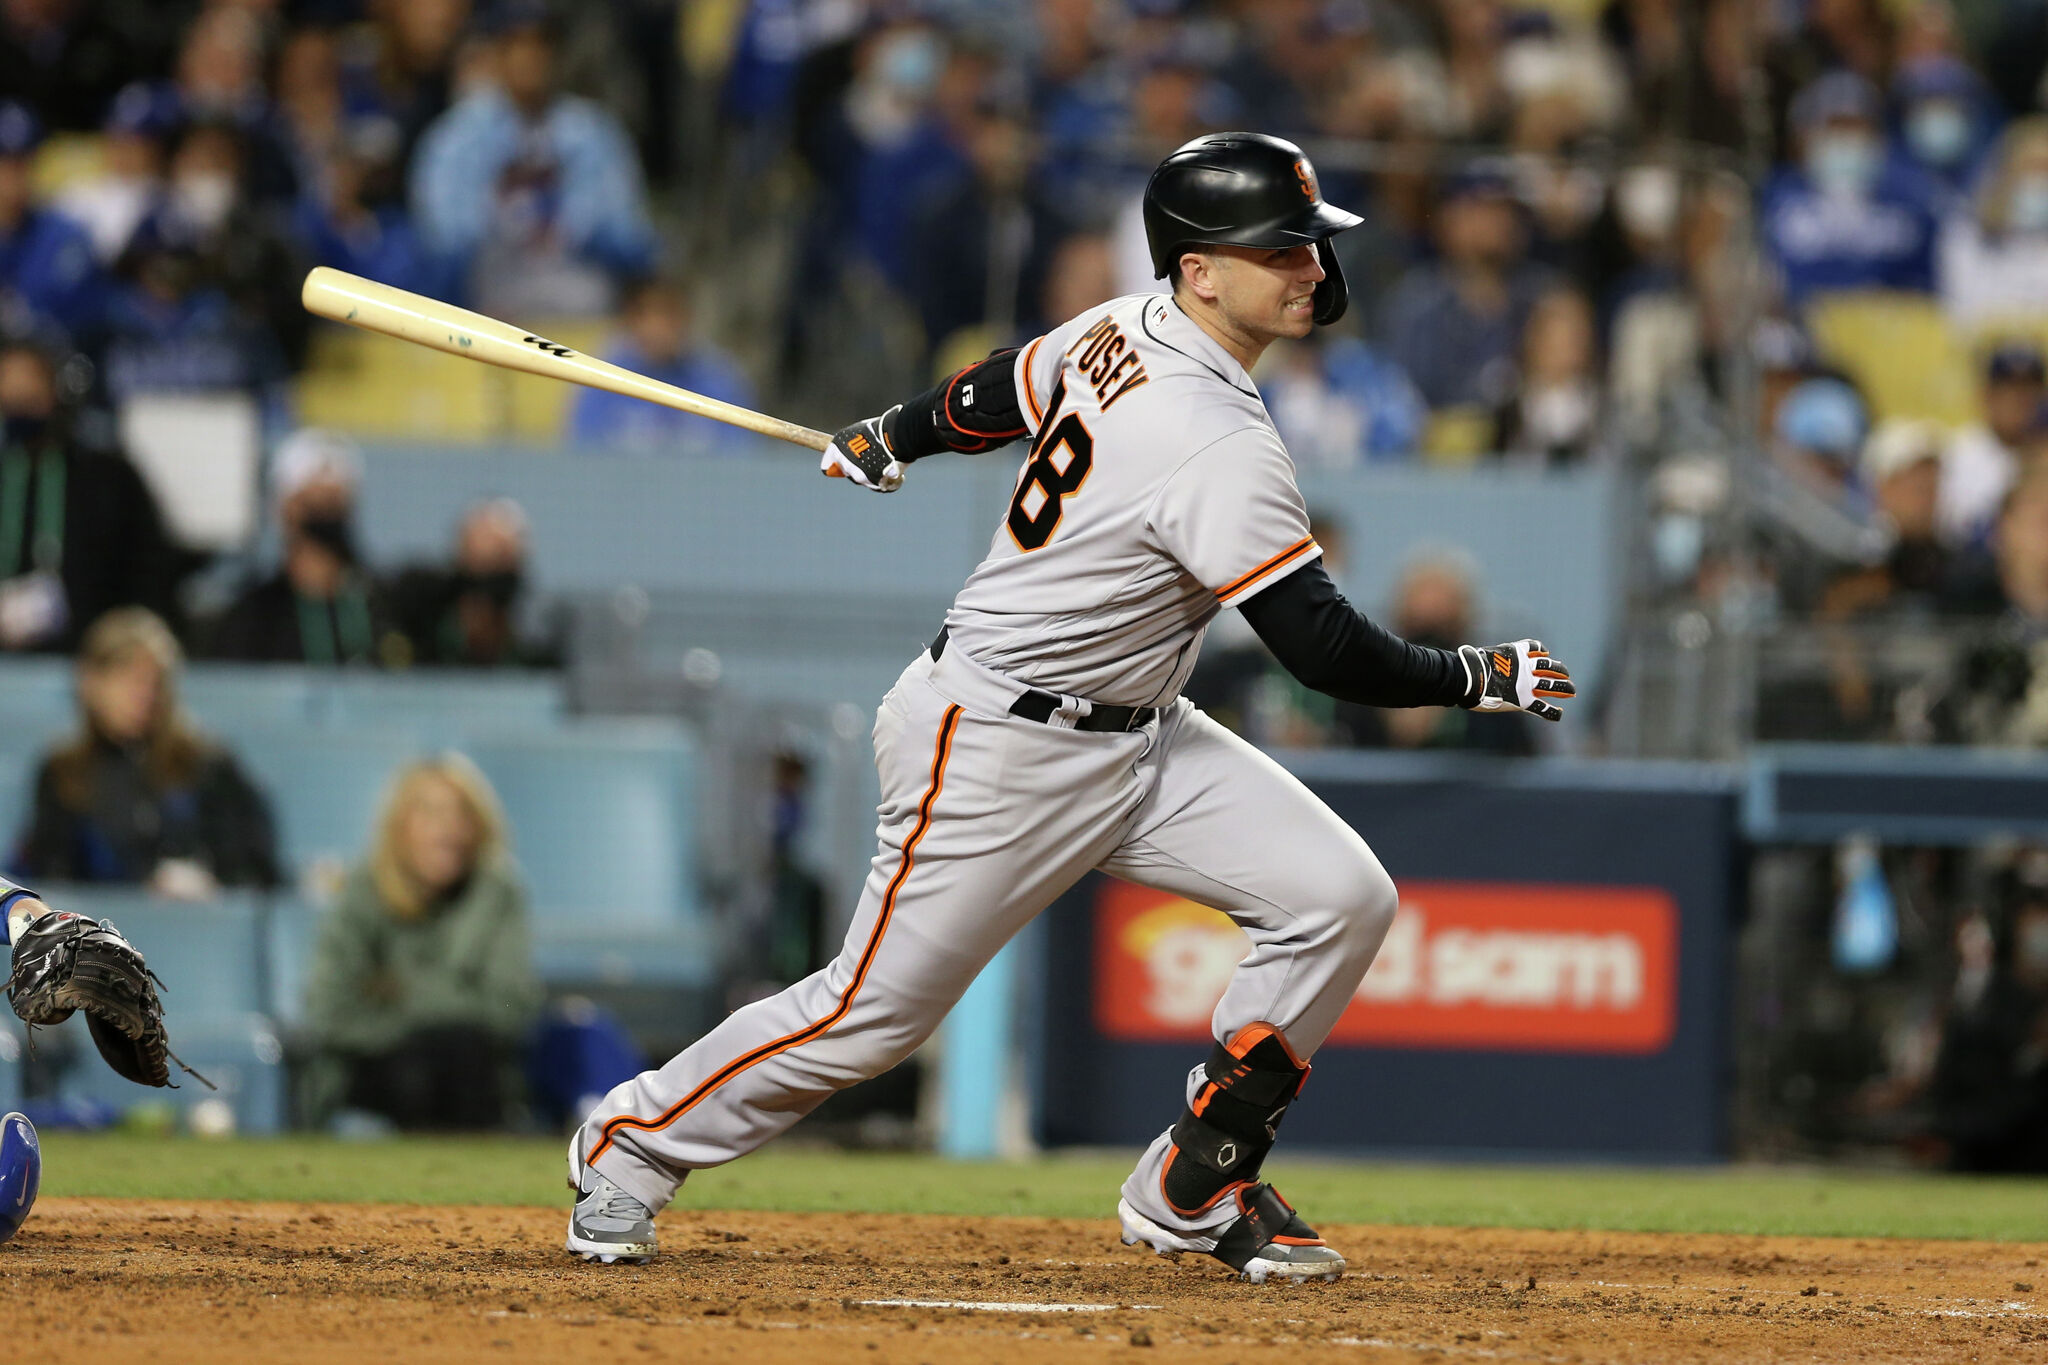 SF Giants legend Buster Posey moving back to Bay Area - Sports